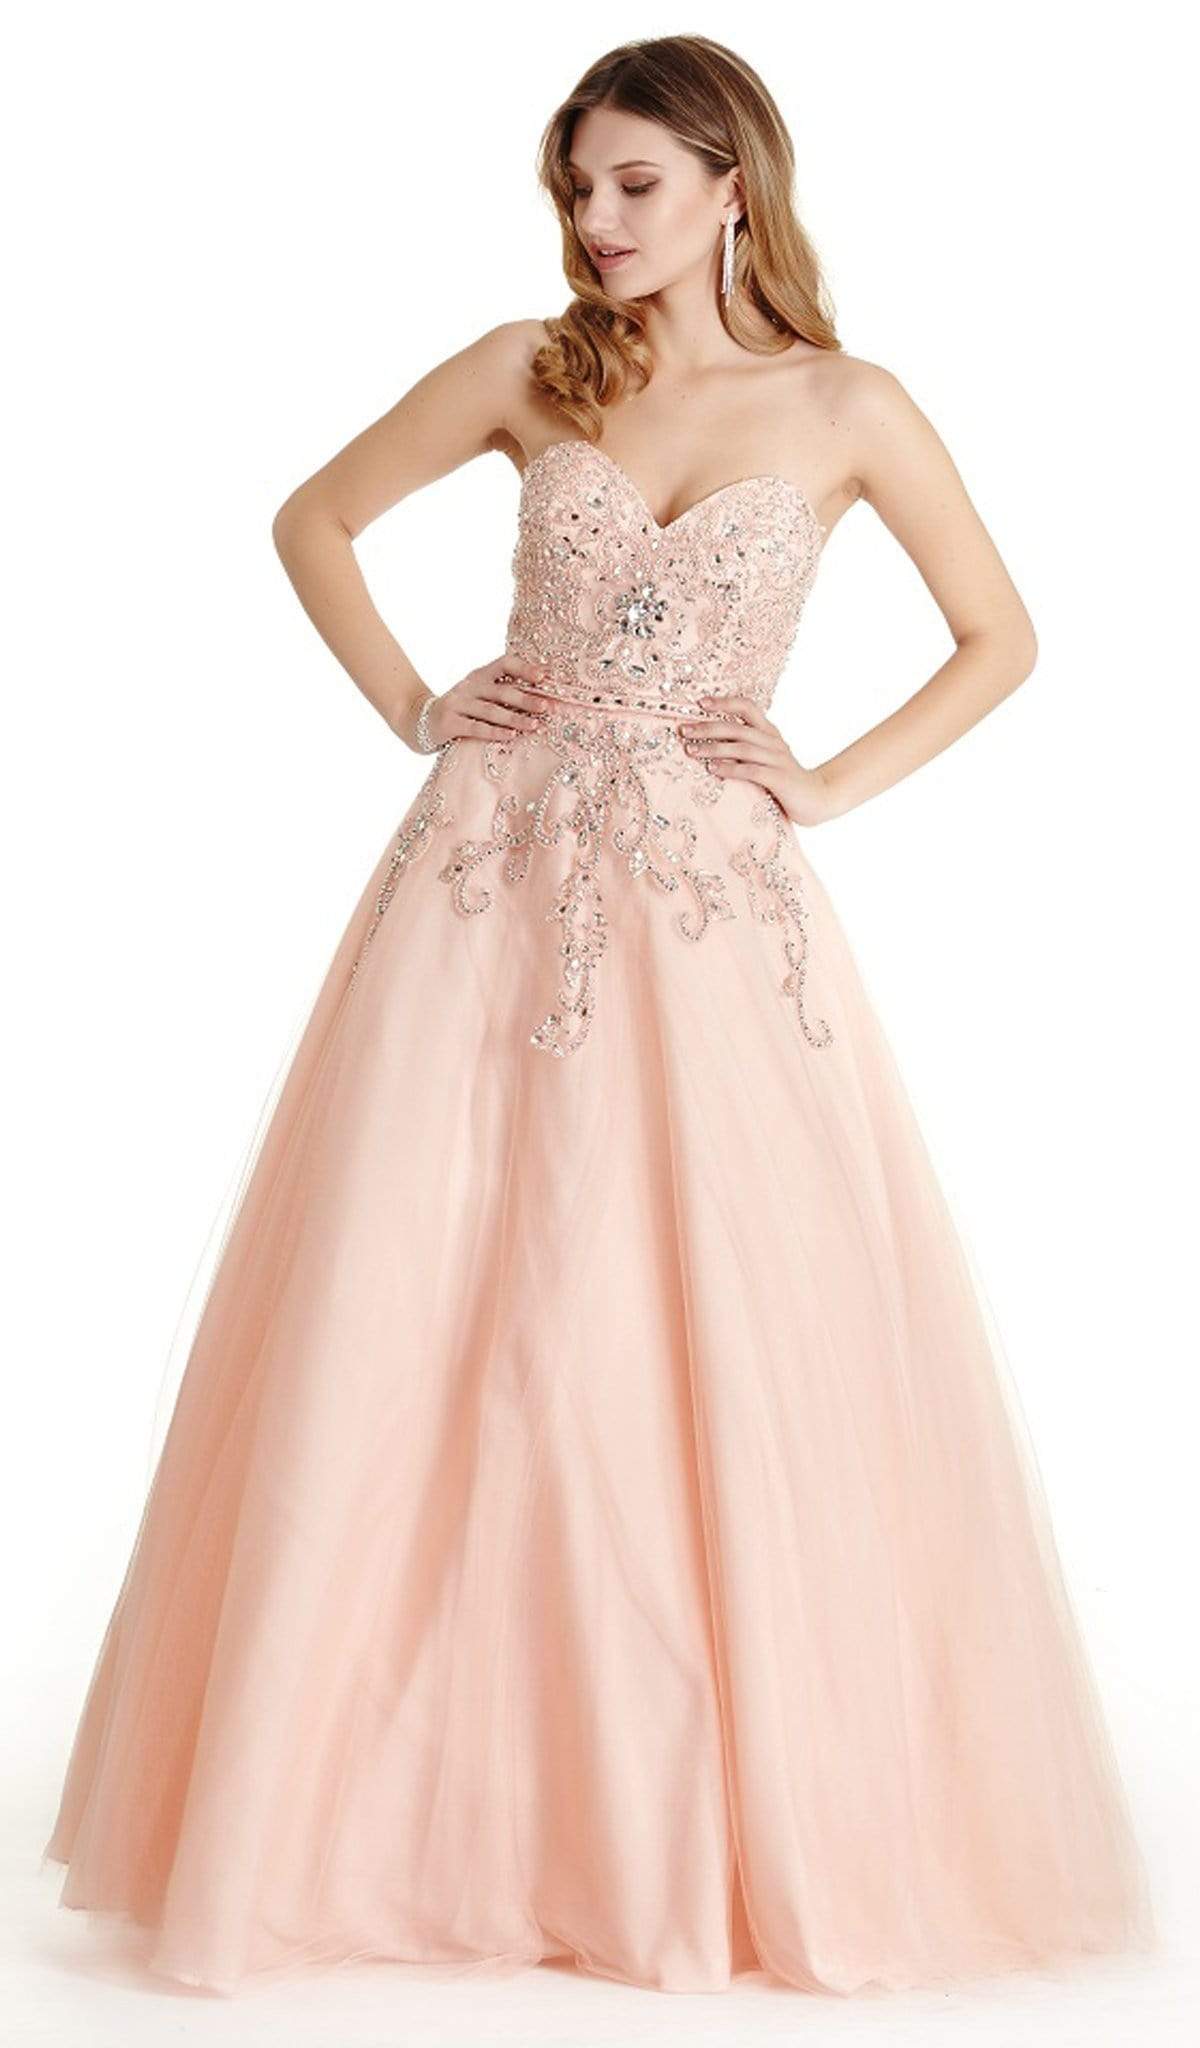 Image of Aspeed Design - Bejeweled Sweetheart Ballgown